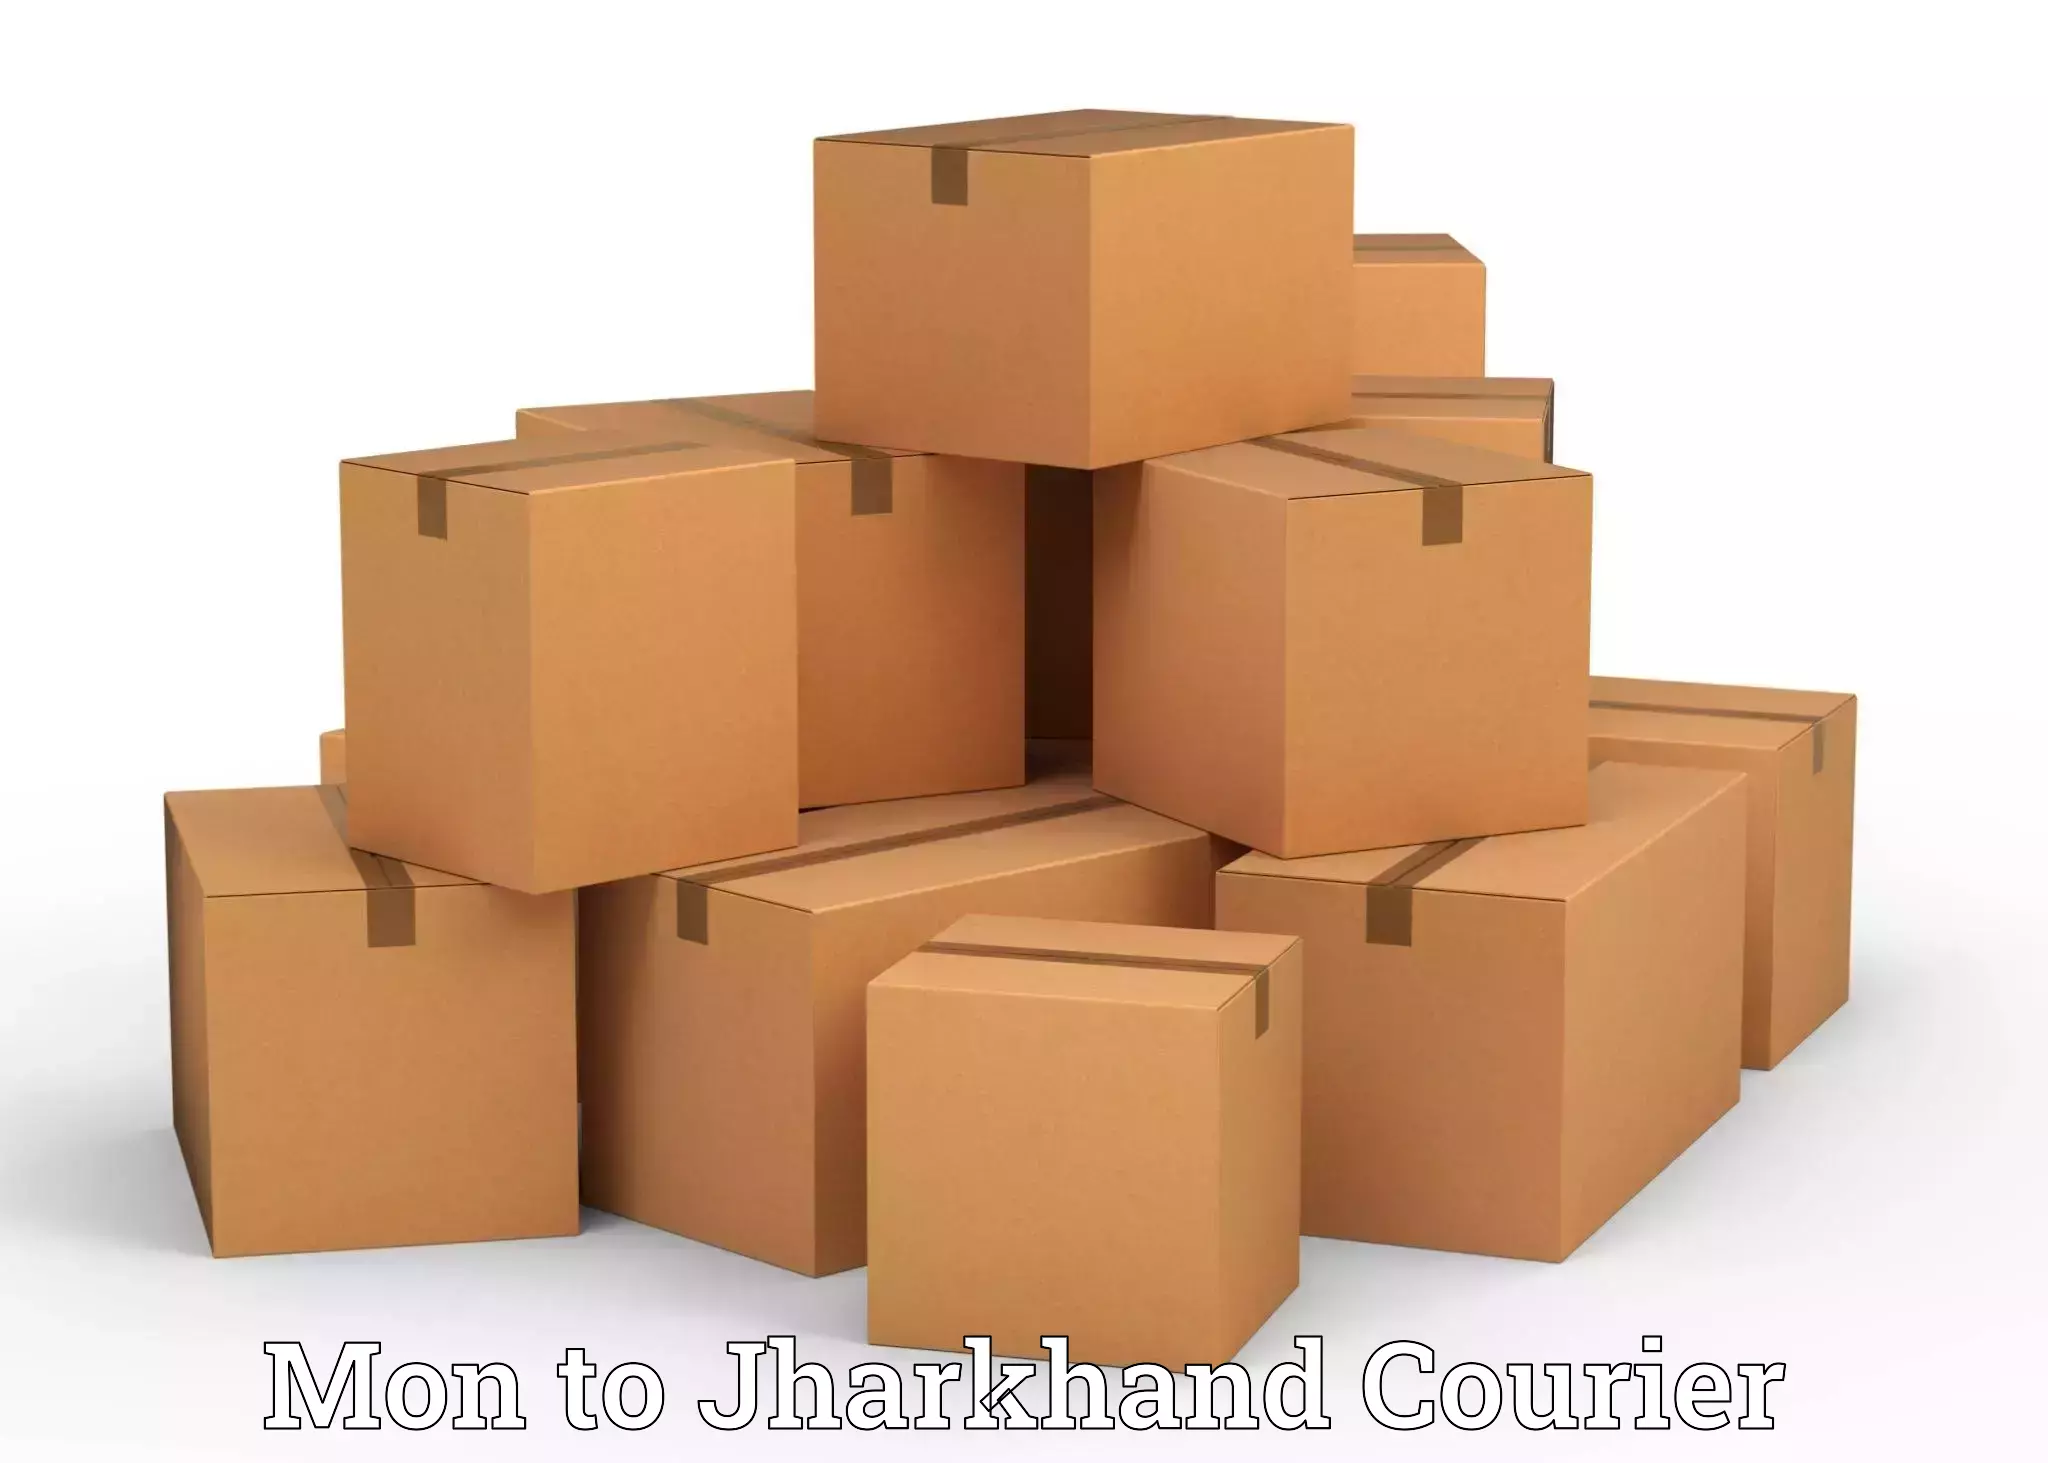 Household moving experts Mon to Jharkhand